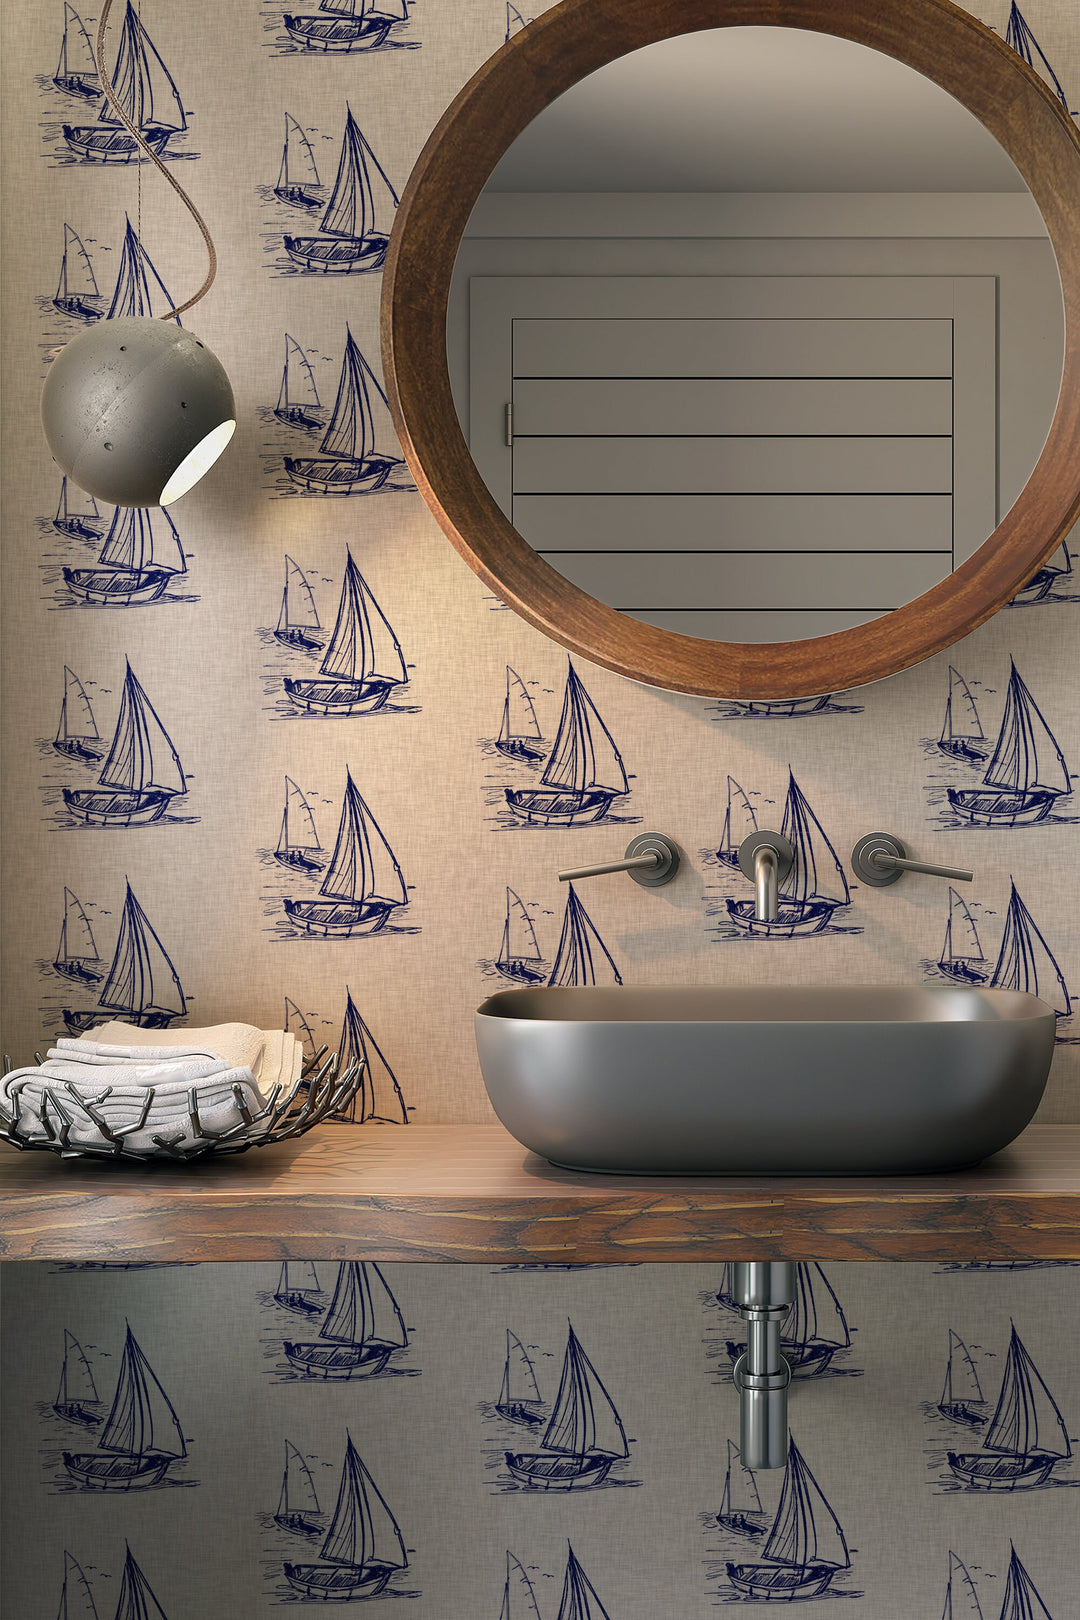 Hand drawn ships on a linen background  - Removable wallpaper - Vinyl Peel and Stick Wallpaper design #3329